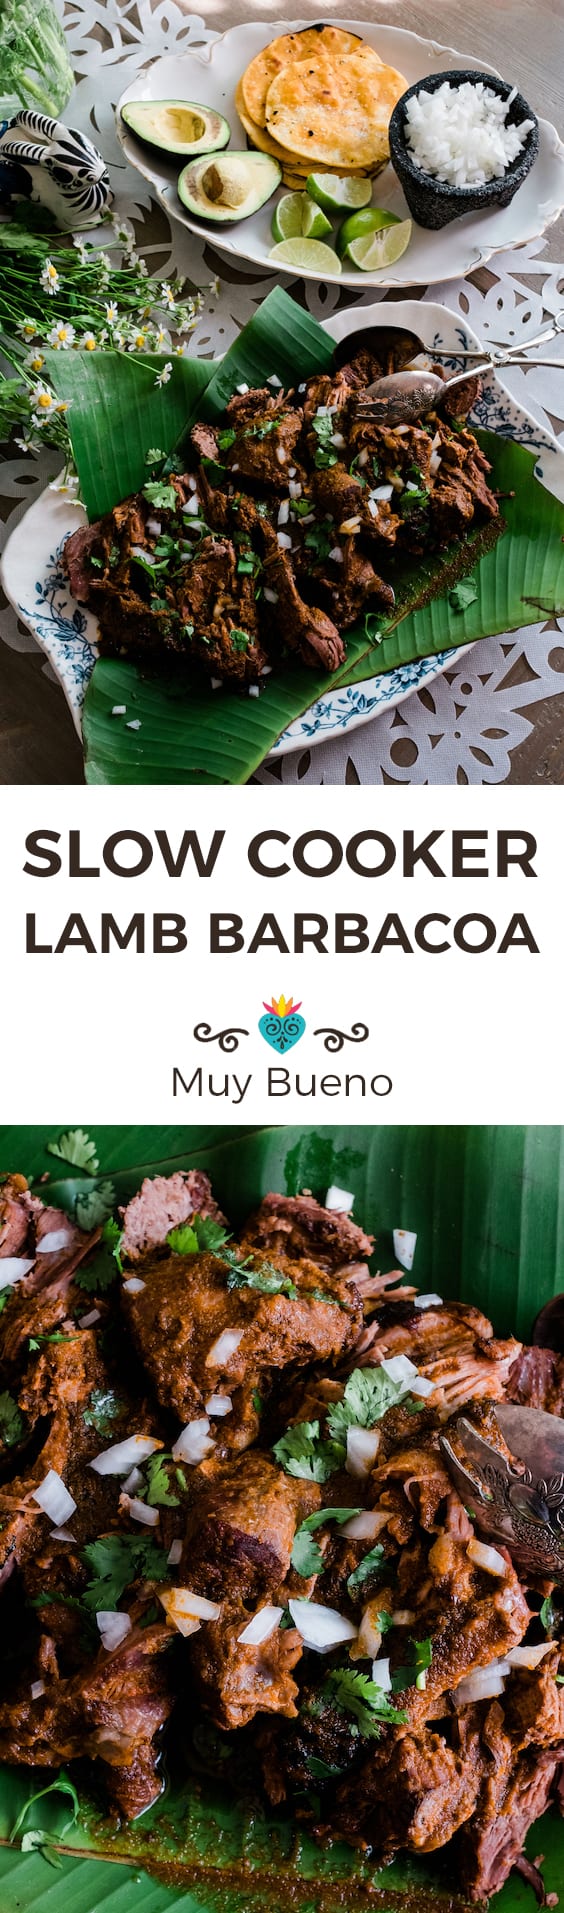 Slow Cooker Lamb Barbacoa collage with text overlay